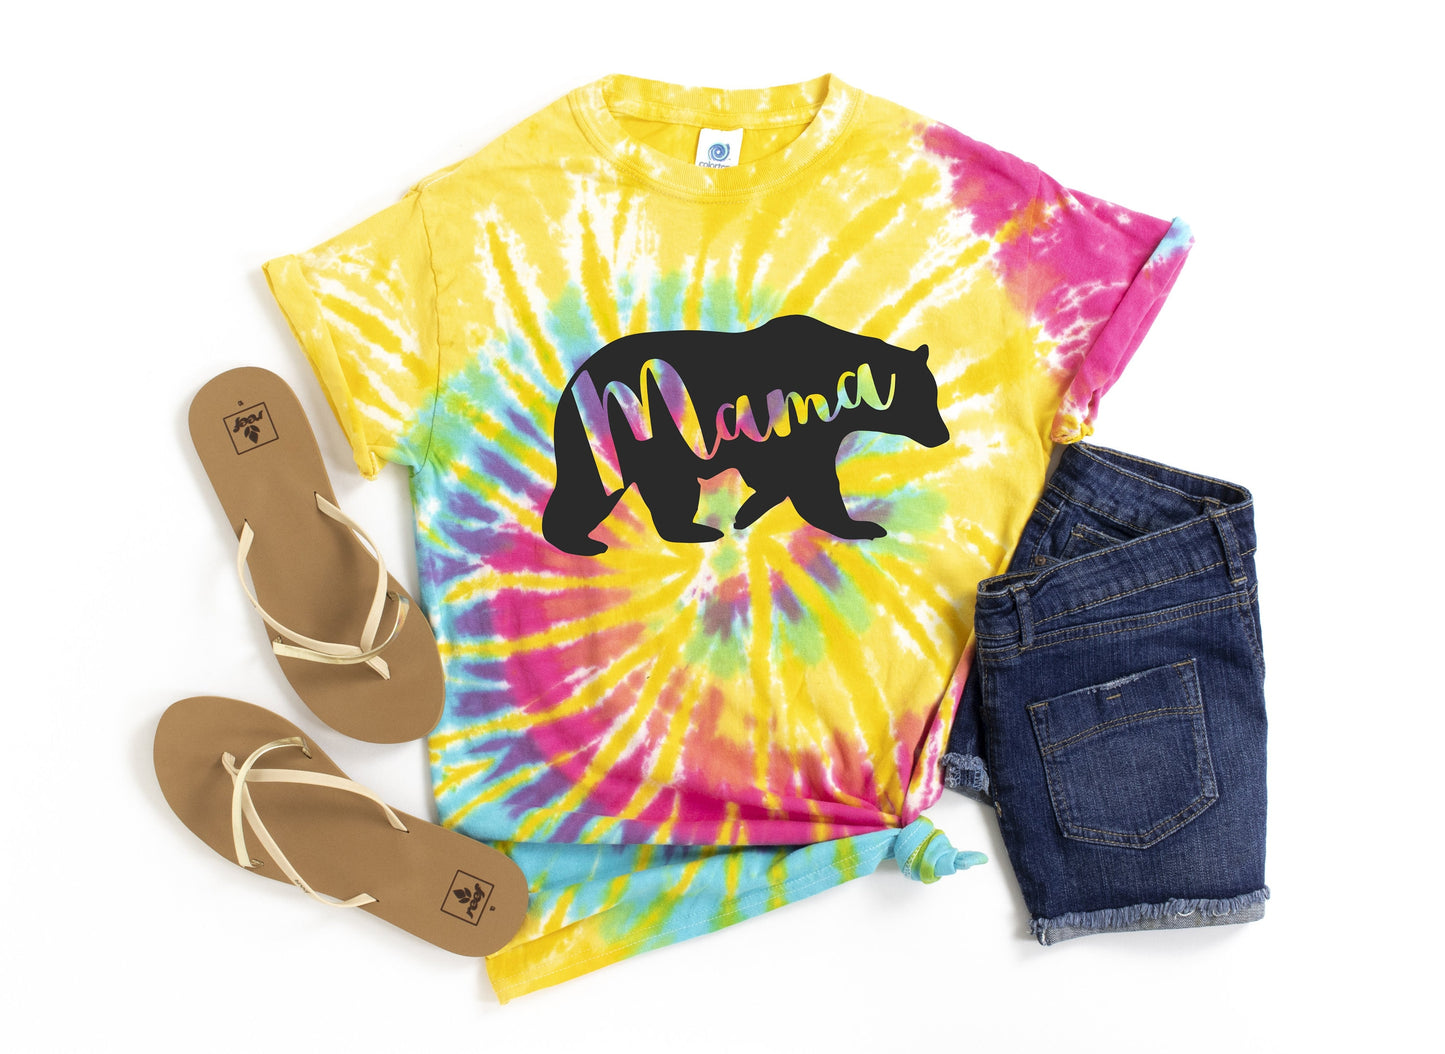 Mama Bear Aurora Tie Dye t-shirt - Kids and Adults Sizes - Tie Dye Festival Shirt - Mama Bear Shirt - Gift for Mom - Mother's Day shirt